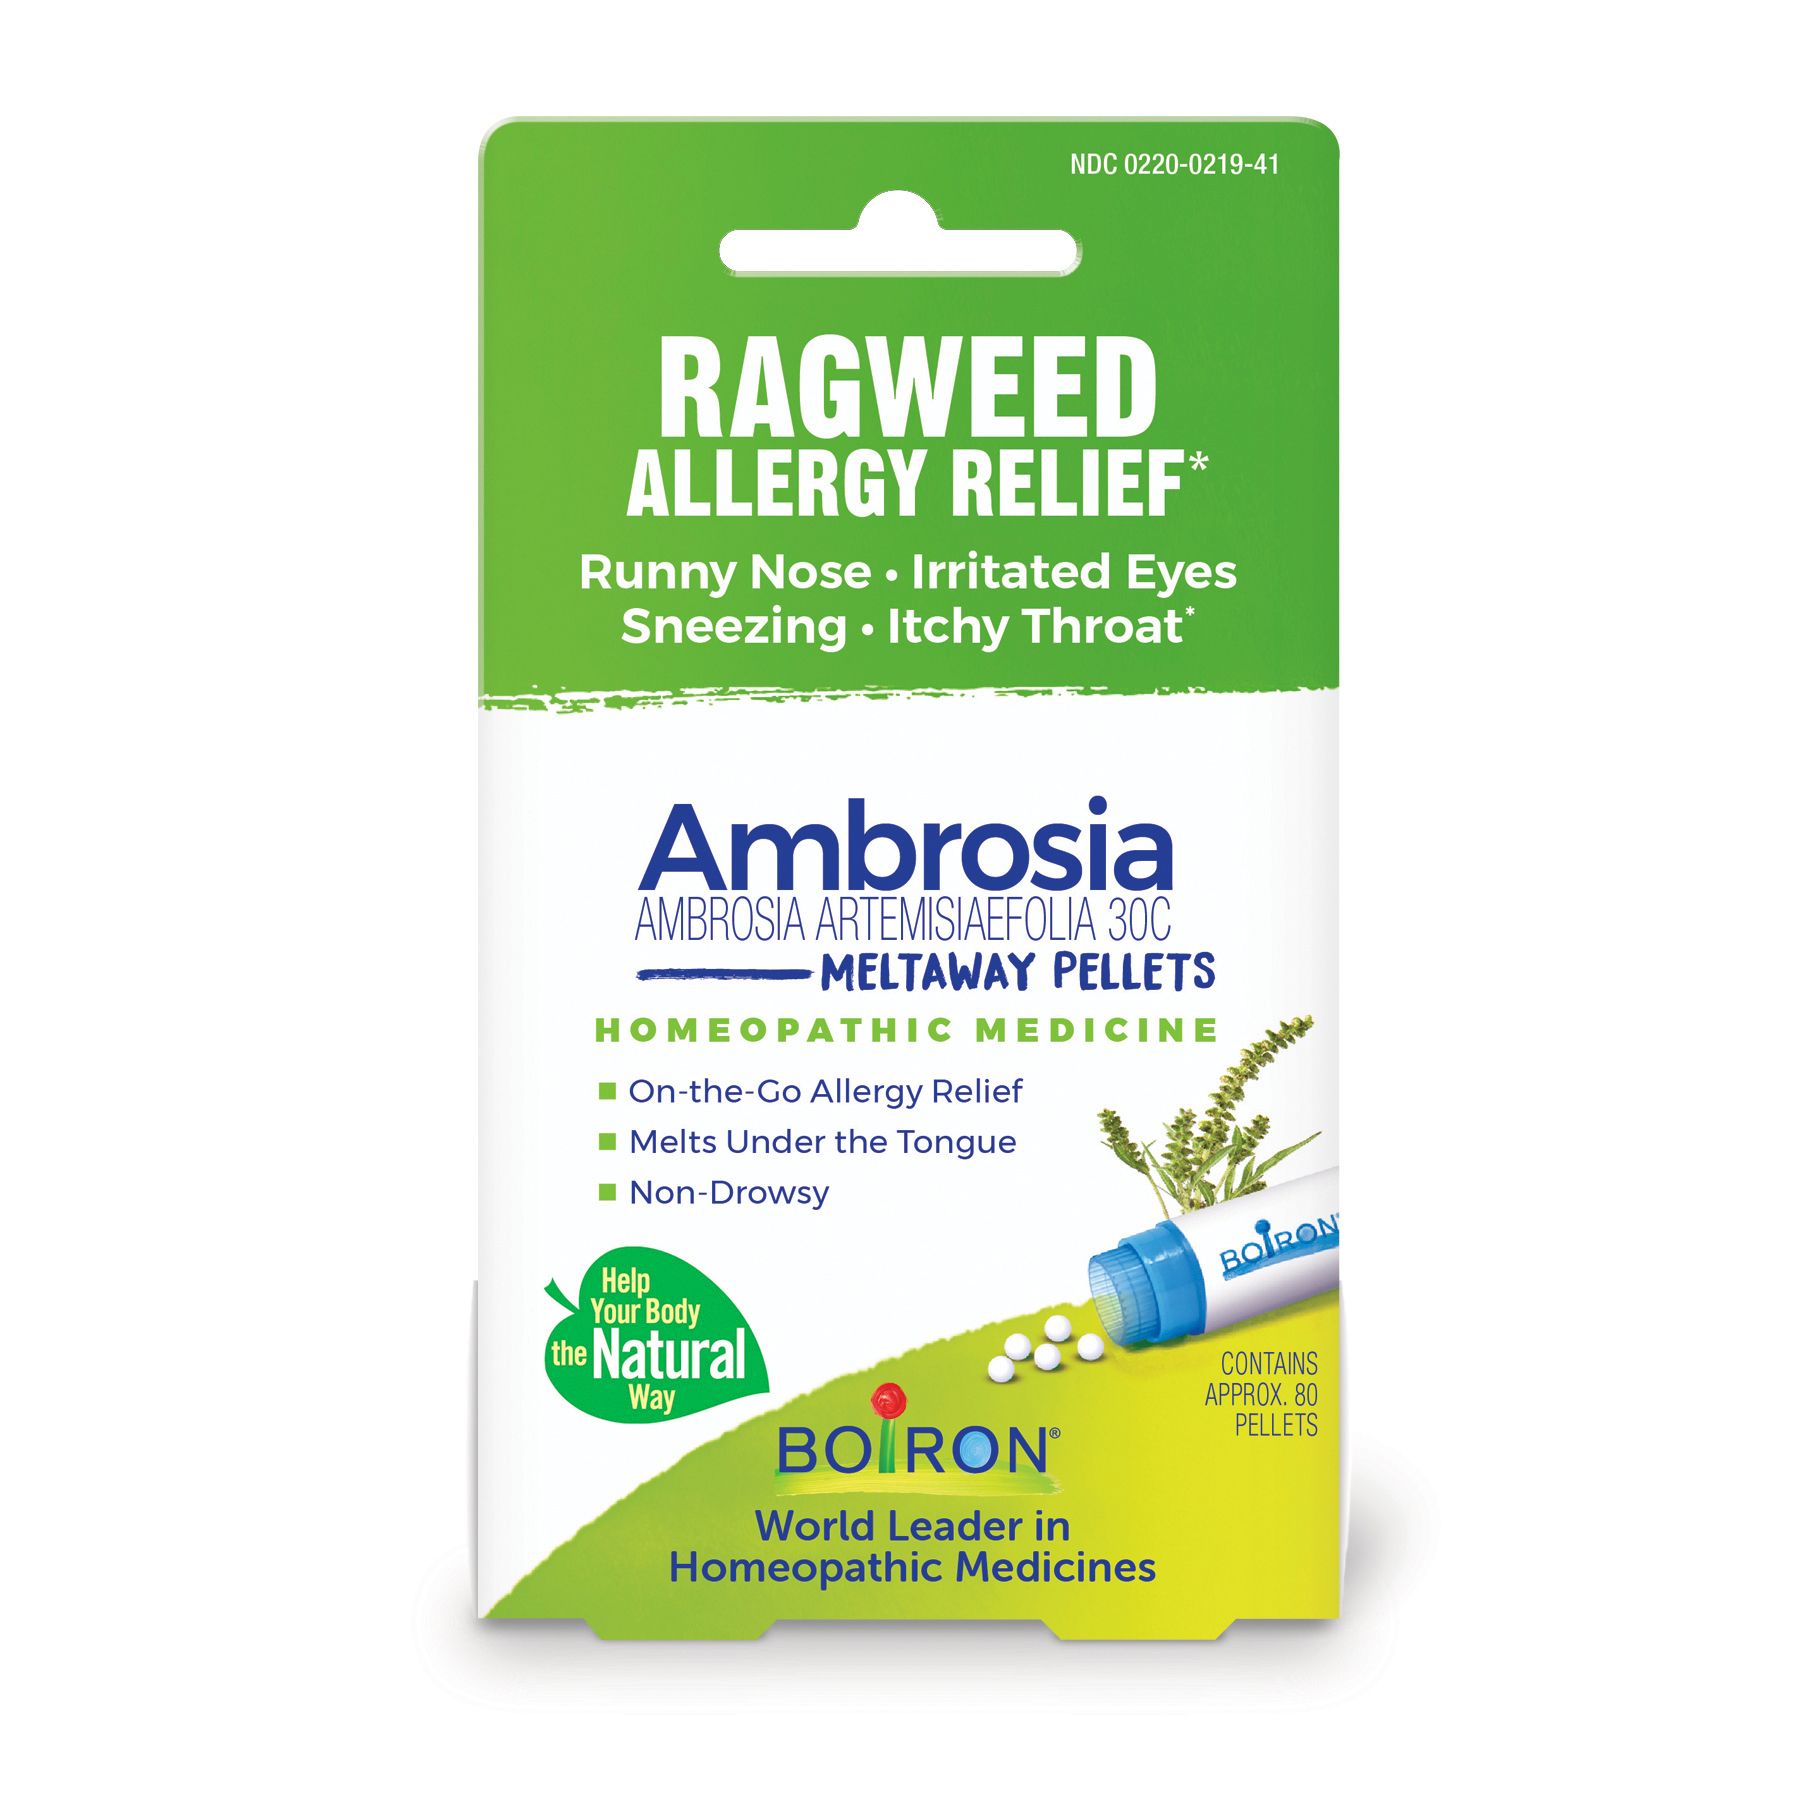 Boiron Ambrosia Artemisiaefolia 30C Single Pack, Homeopathic Medicine for Ragweed Allergy Relief, Runny Nose, Irritated Eyes, Sneezing, Itchy Throat, 80 Pellets - image 1 of 10